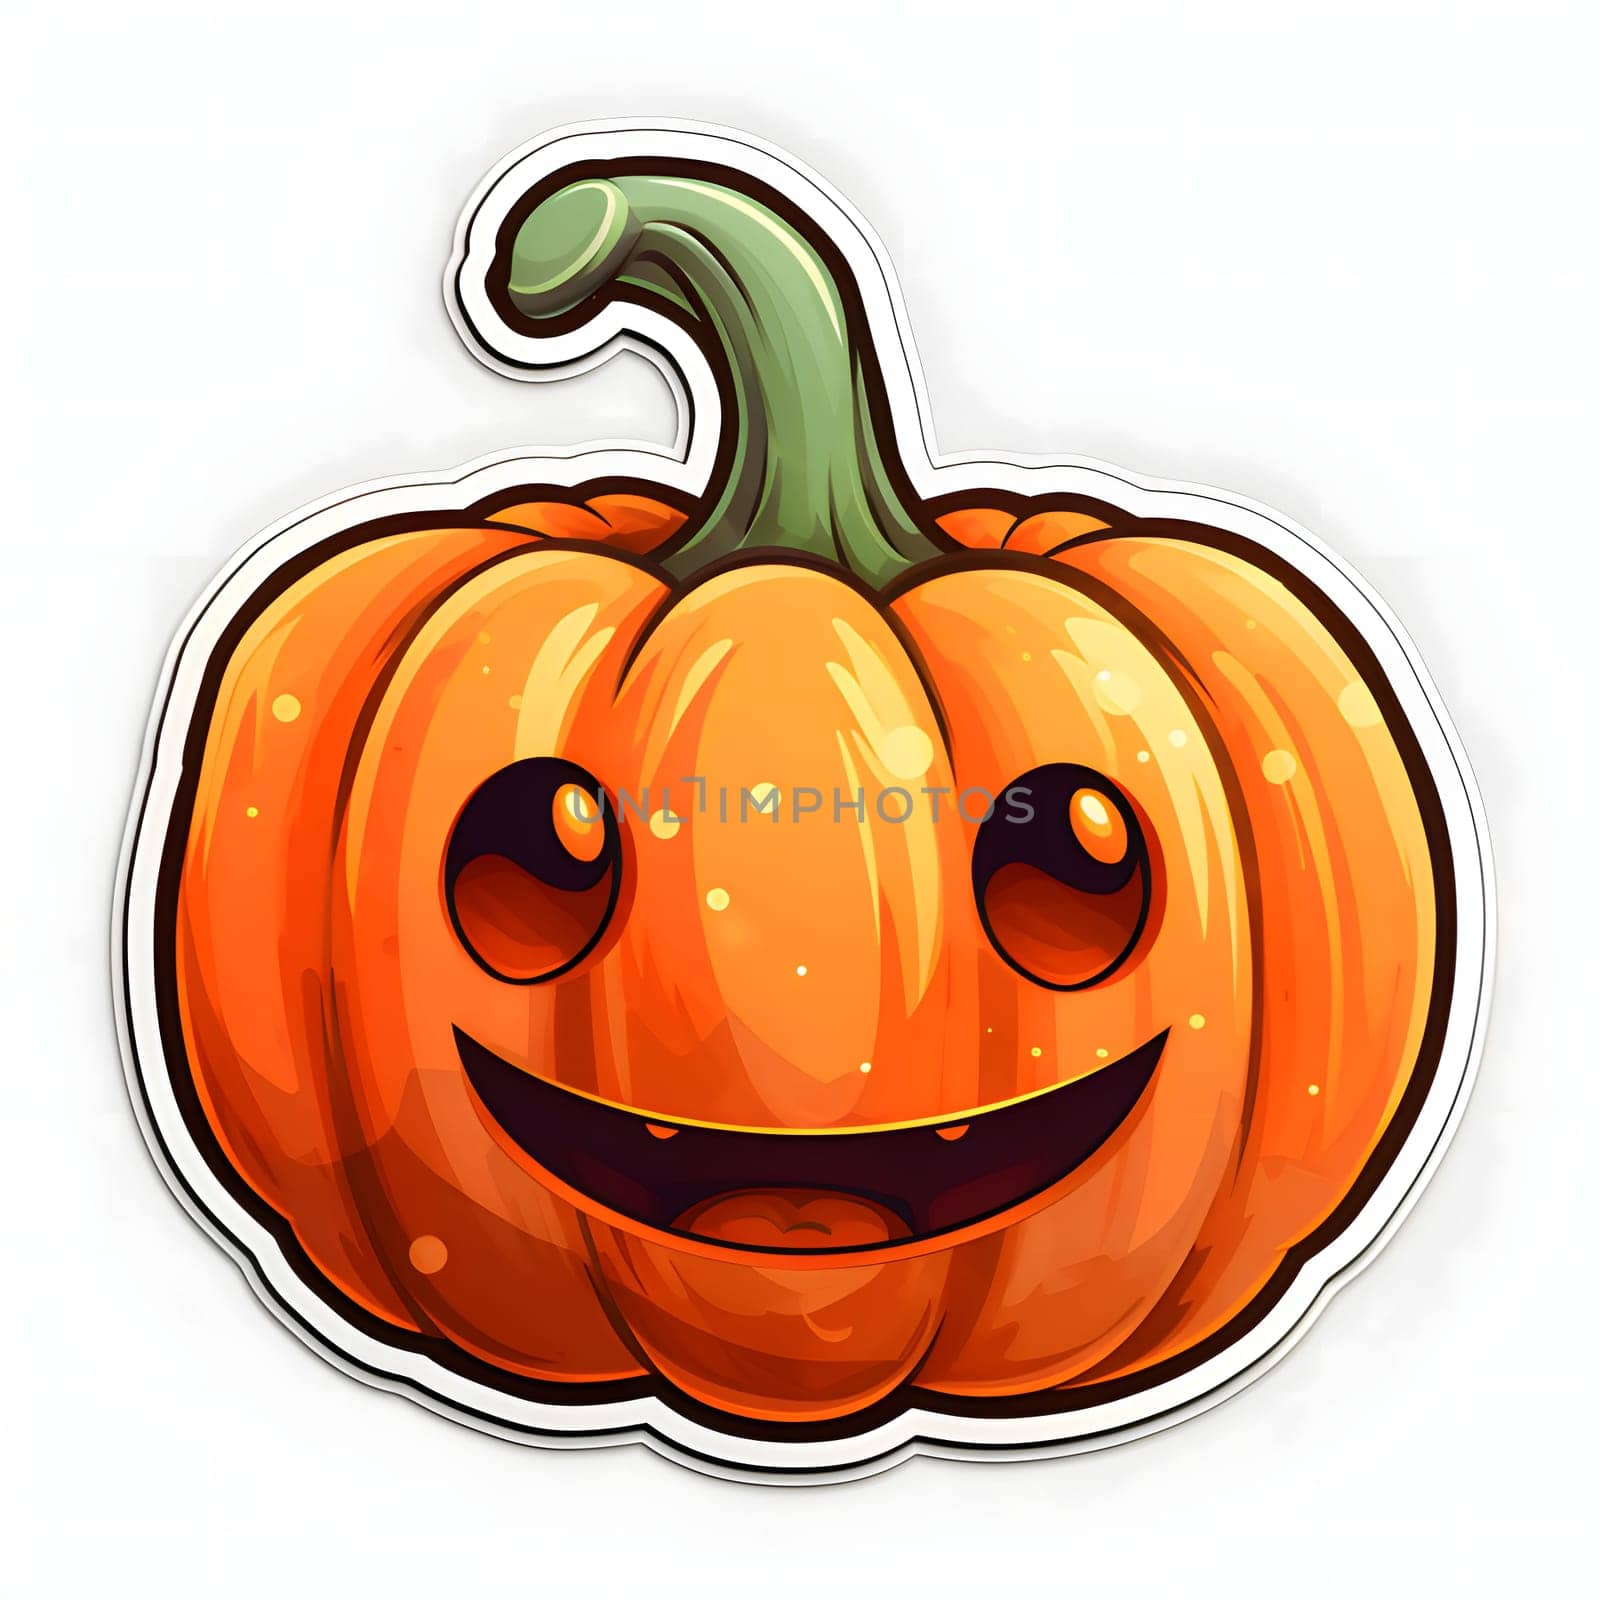 Smiling pumpkin jack-o-lantern sticker, Halloween image on a white isolated background. by ThemesS